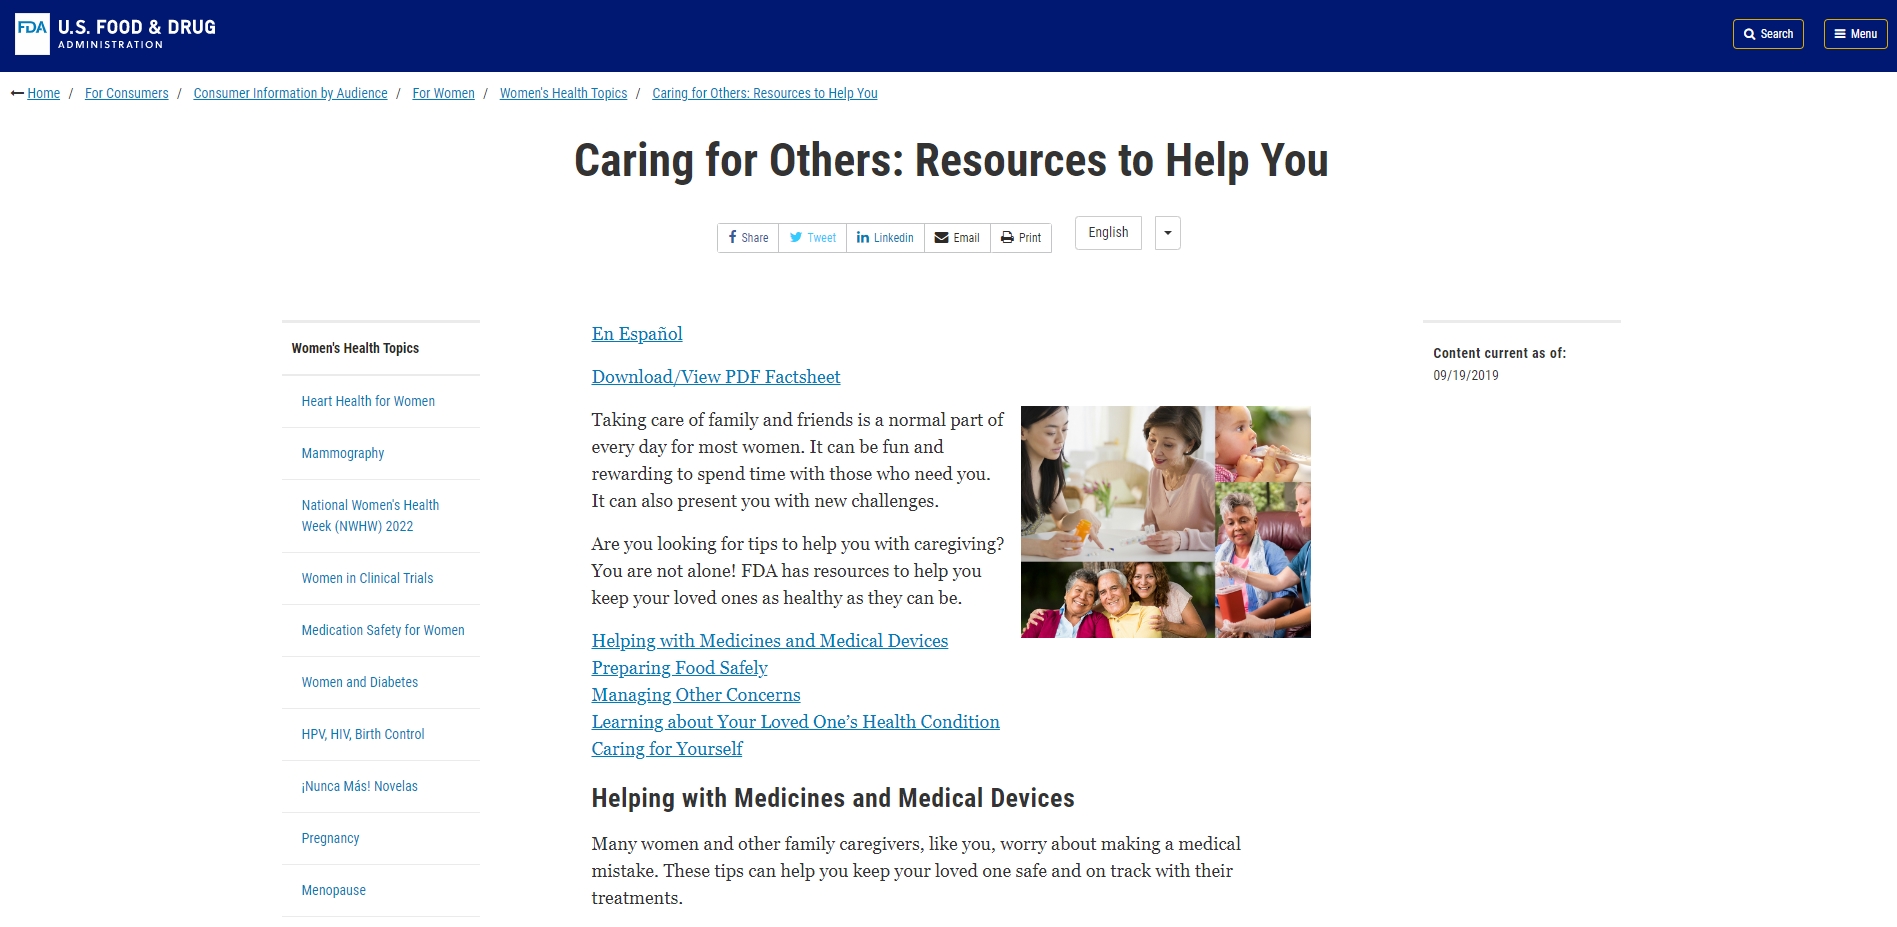 Caring for Others: Resources to Help You